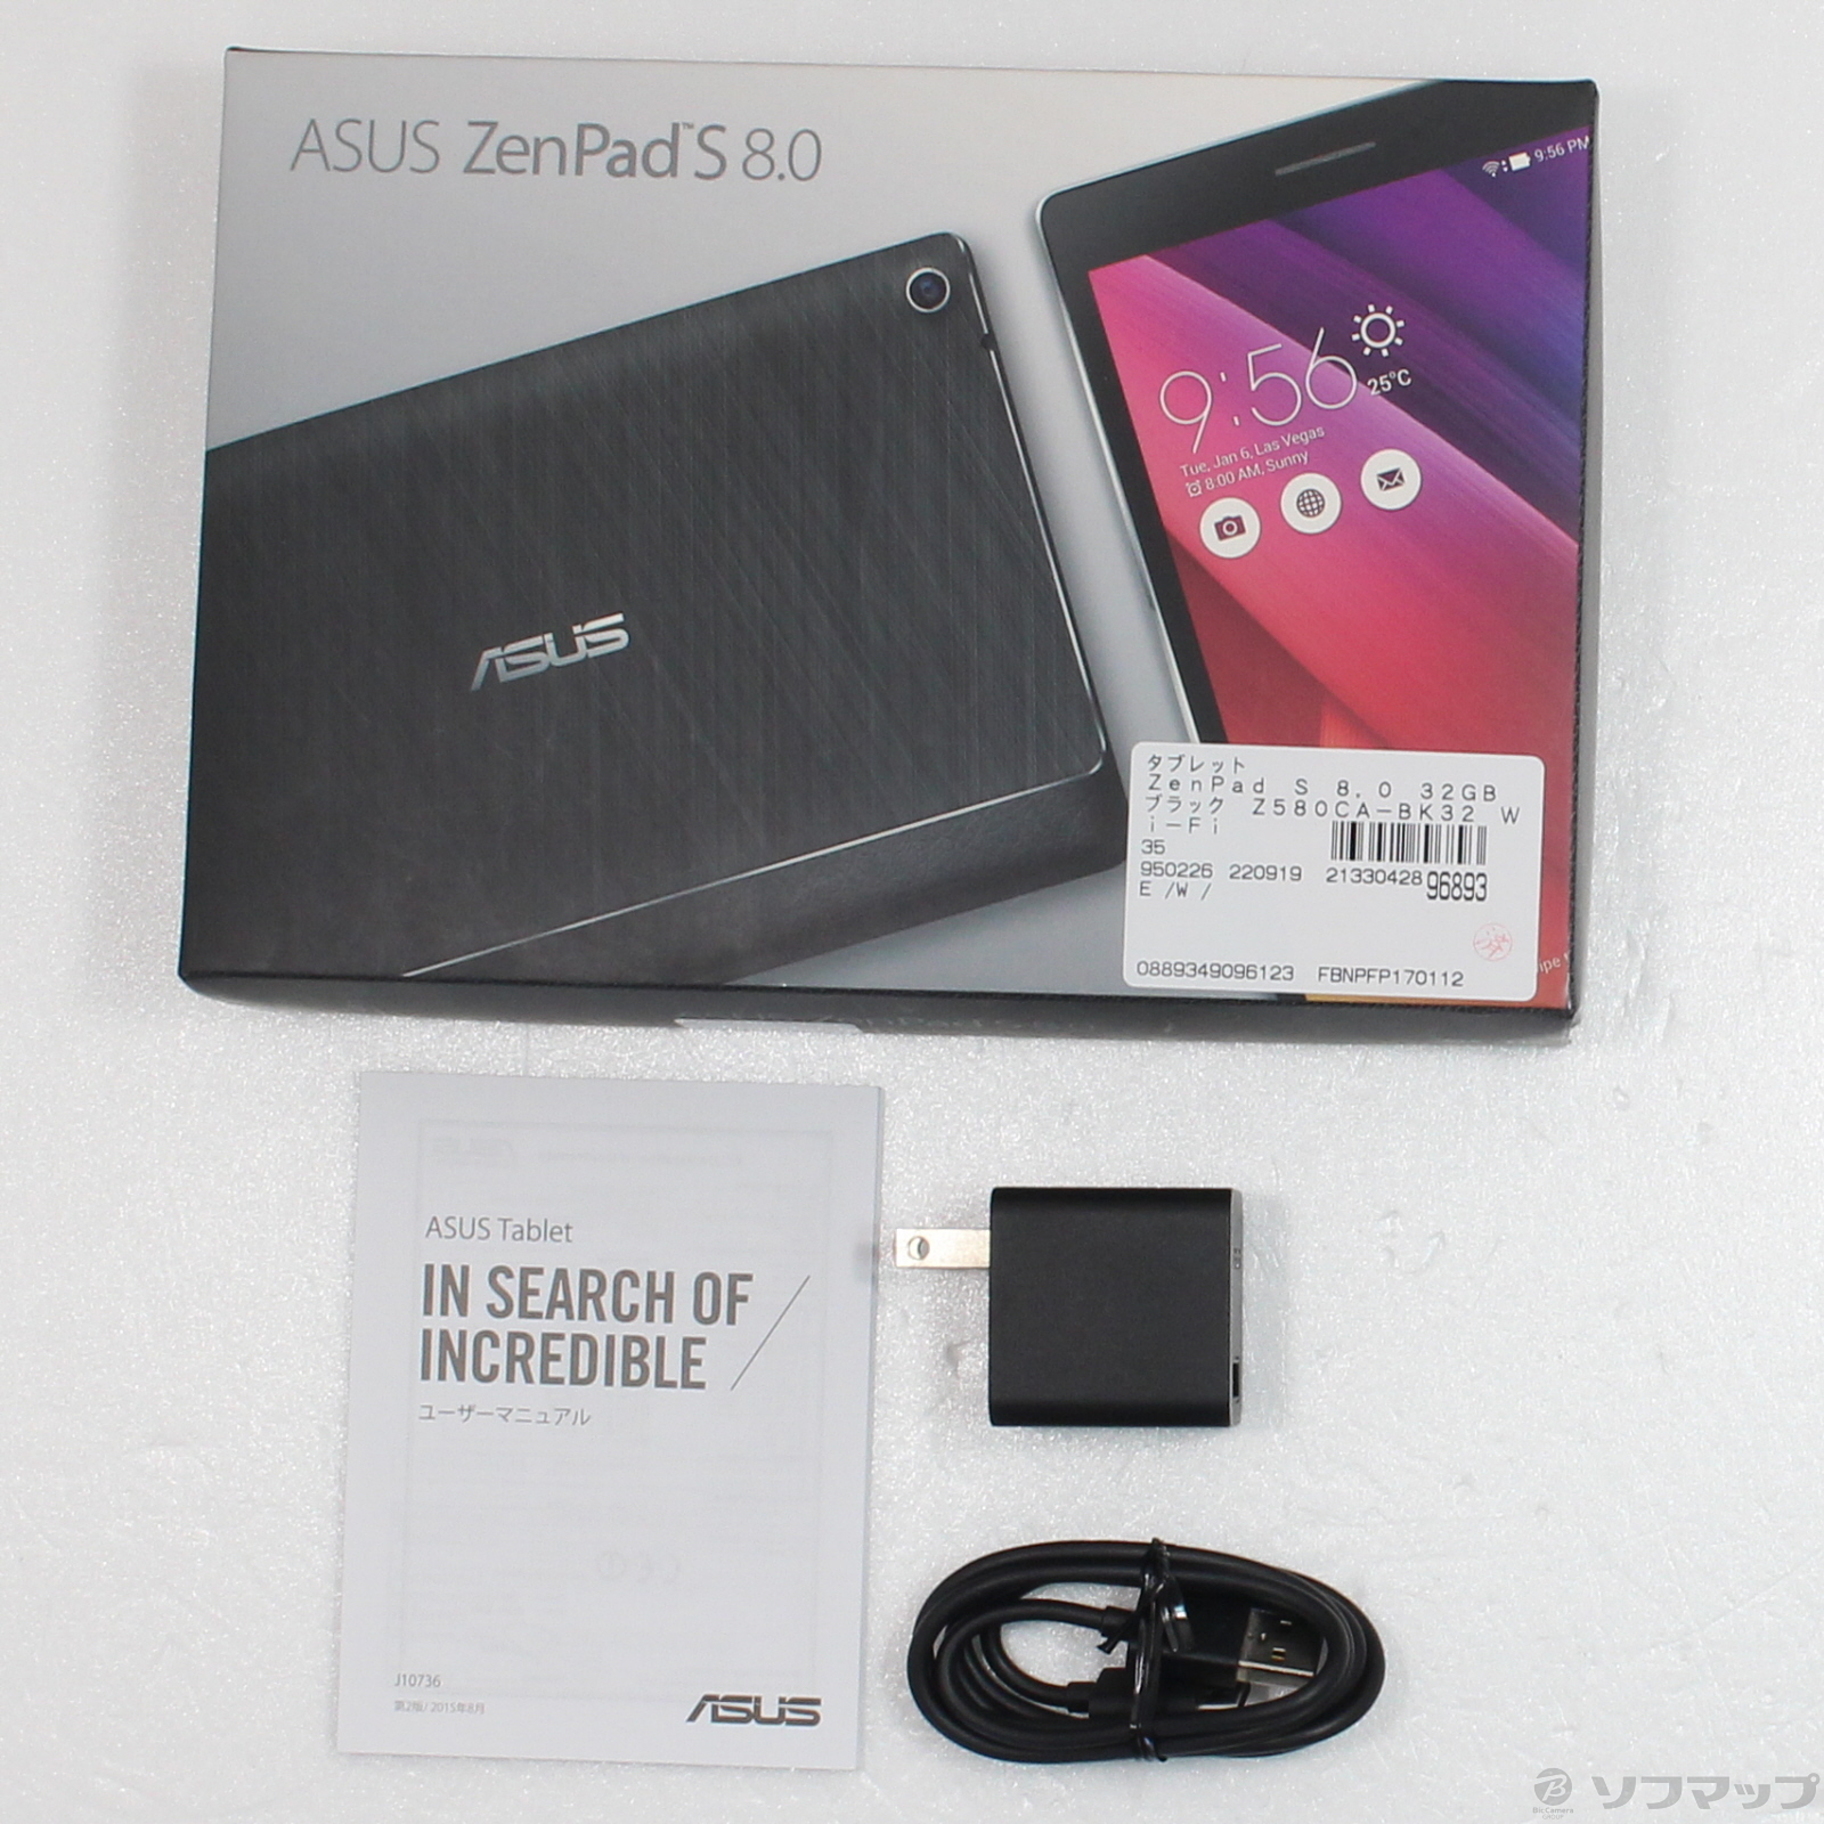 ASUS ZenPad Z580CA-BK32 タブレット／Android